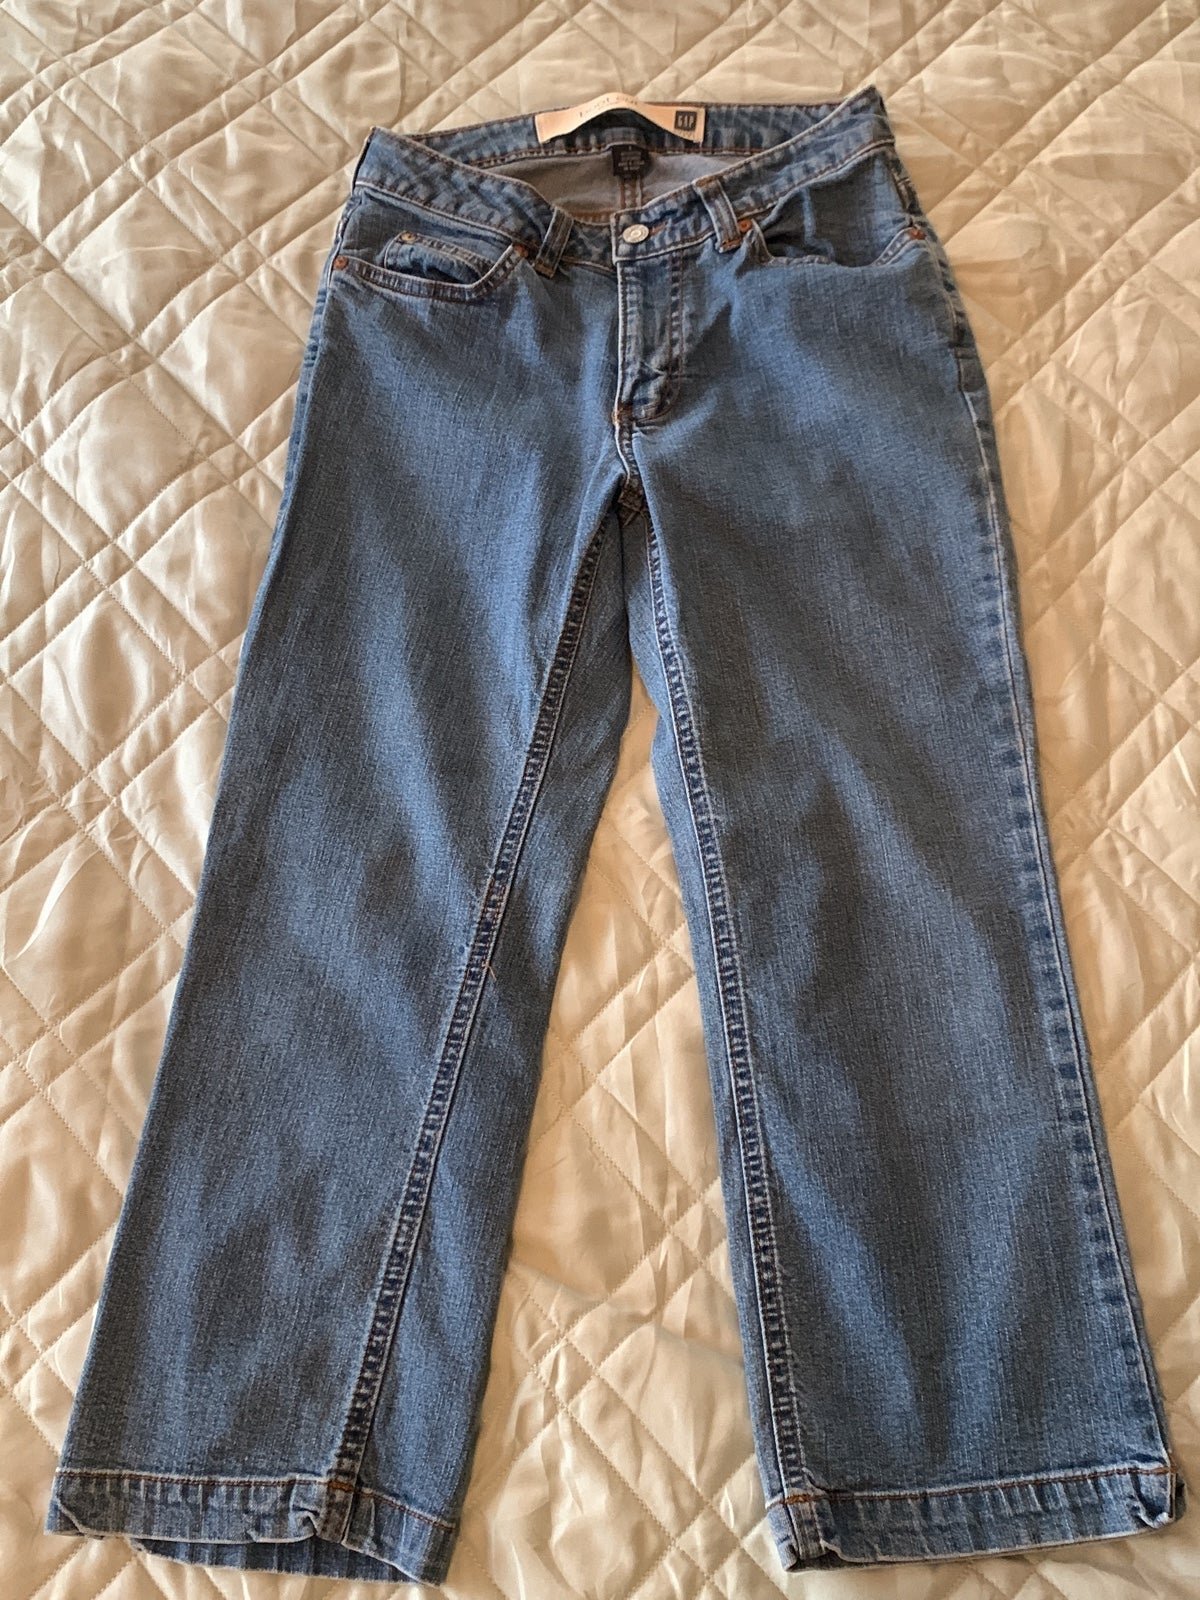 Beautiful Gap Bootcut Crop Jeans size 2 MMfyvifip outle